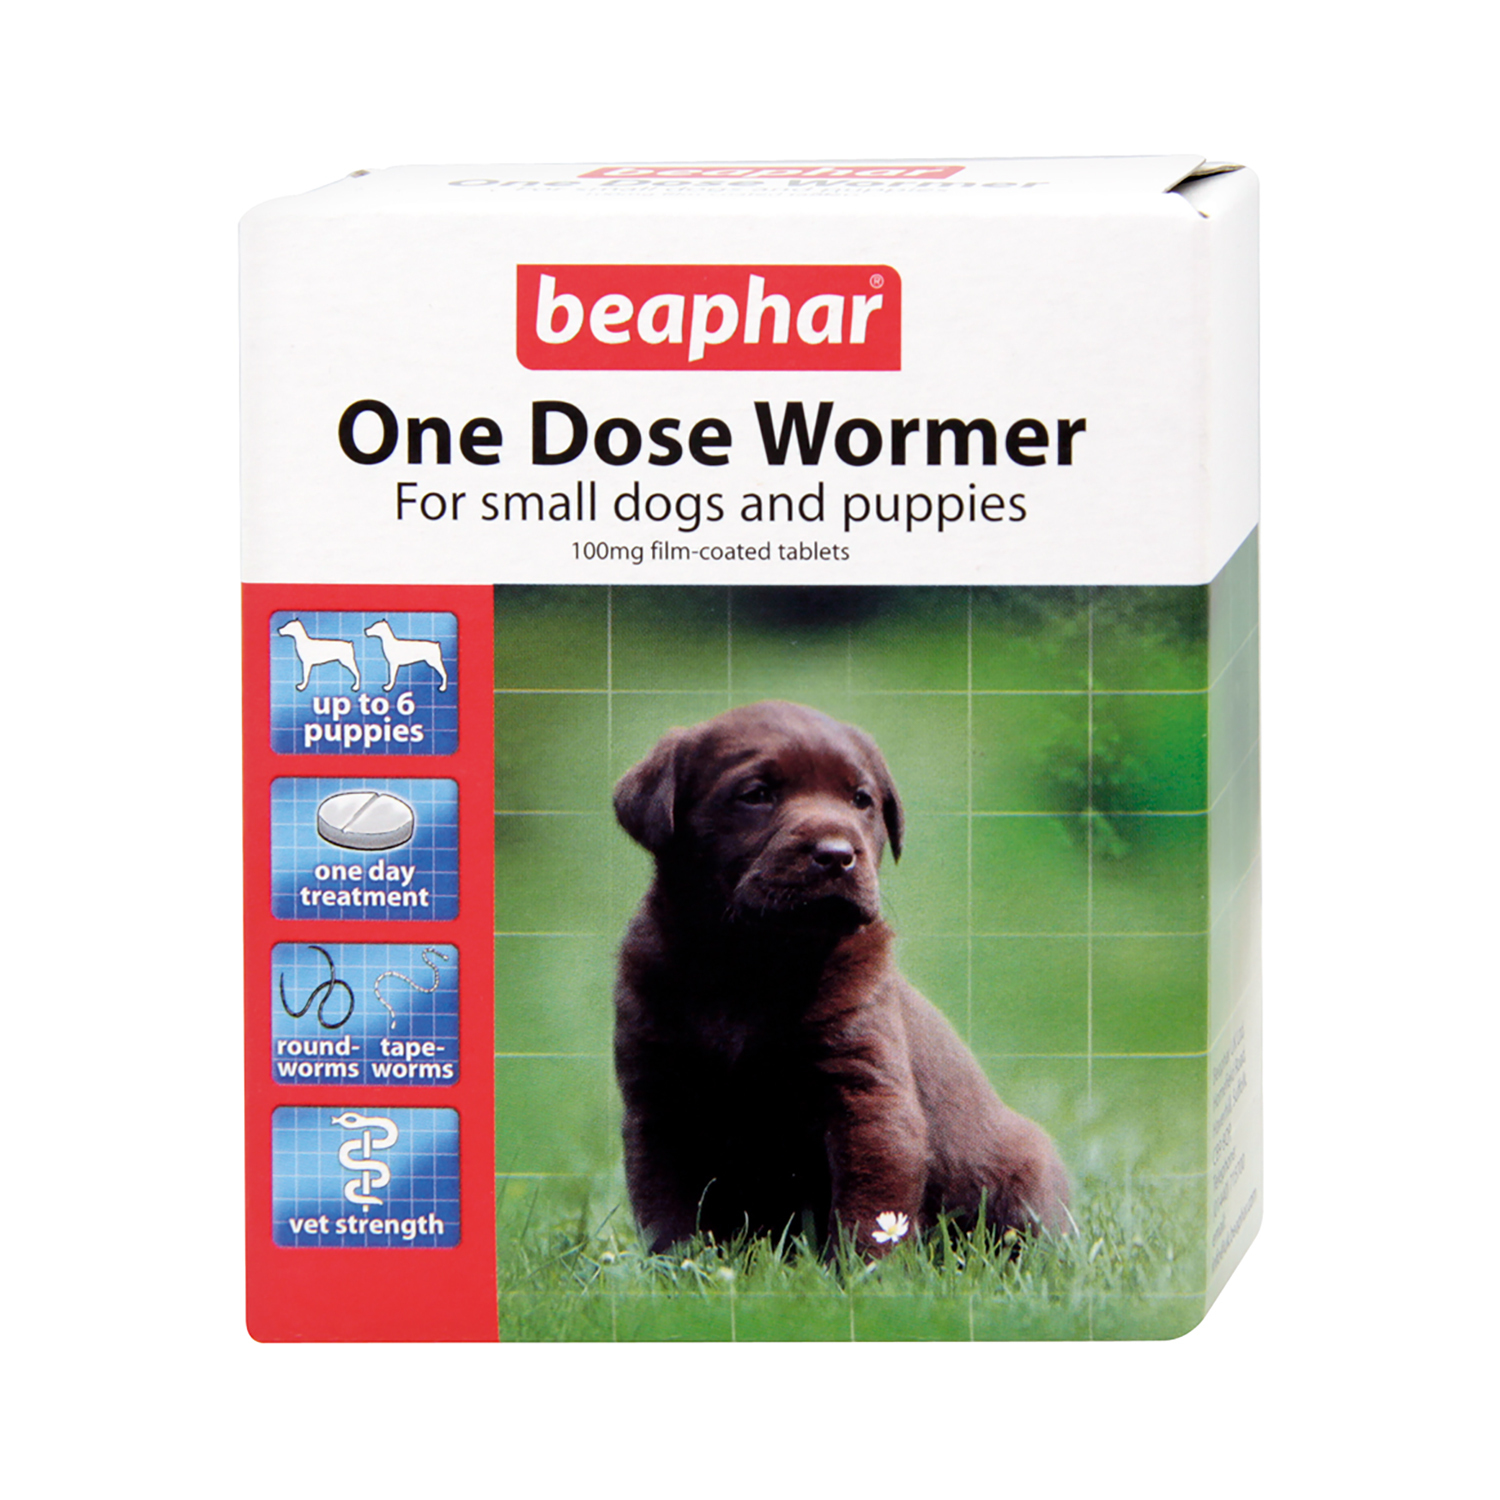 Beaphar One Dose Worming Tablets for Small Dogs and Puppies Image 2